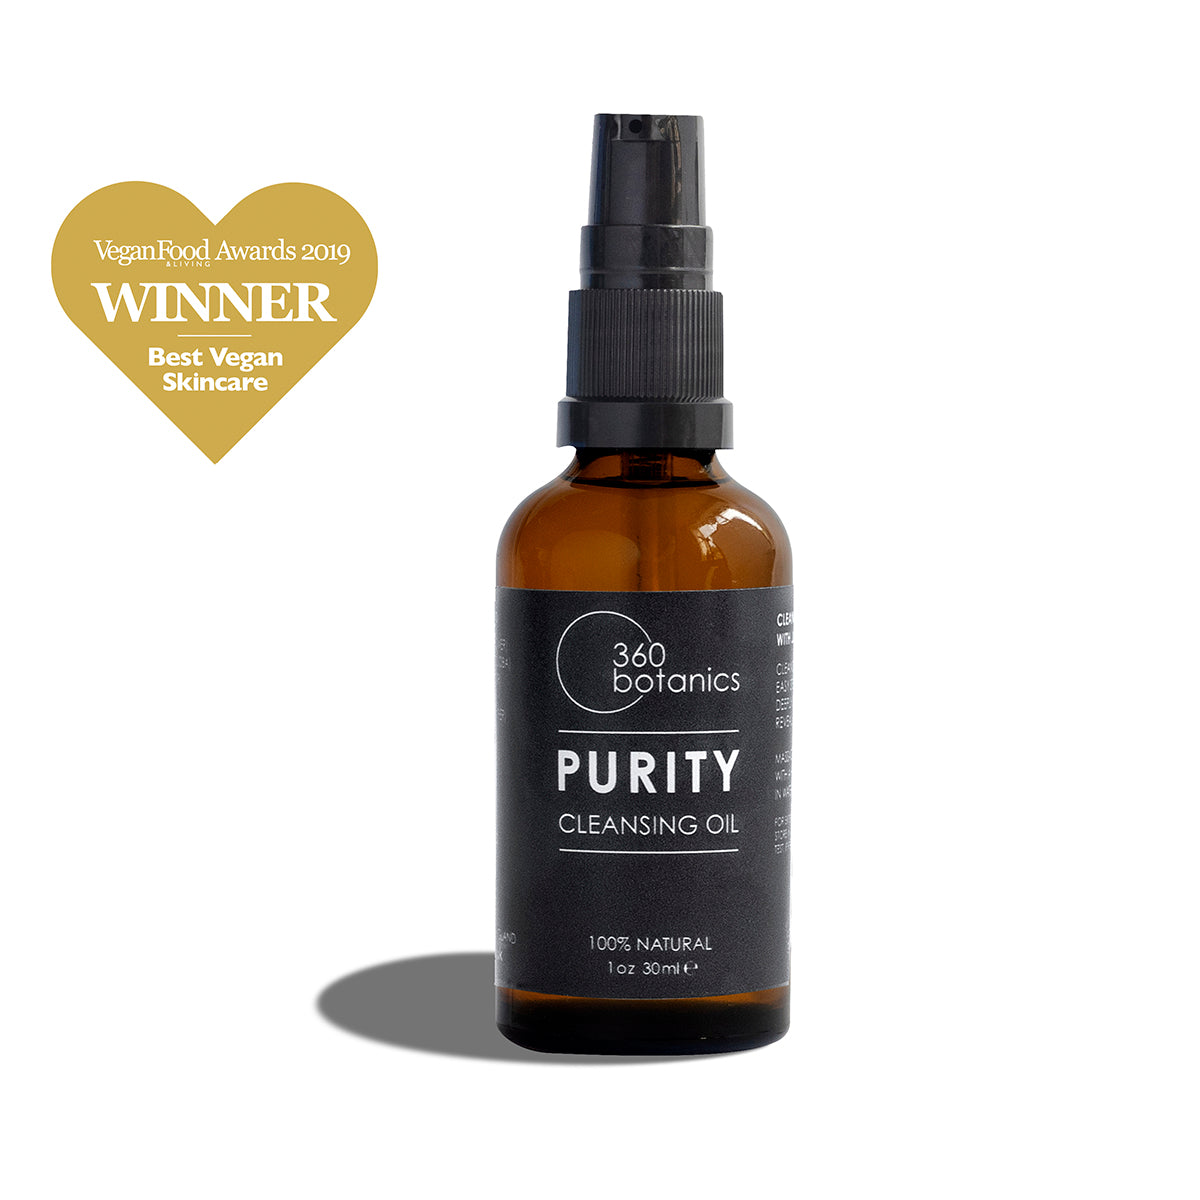 A 360 Botanics Purity Cleansing Oil bottle with a spray nozzle is displayed against a white background. Above the bottle is a golden heart graphic with the text 'Vegan Food Awards 2019 WINNER Best Vegan Skincare', signifying the product's quality and ethical accolades